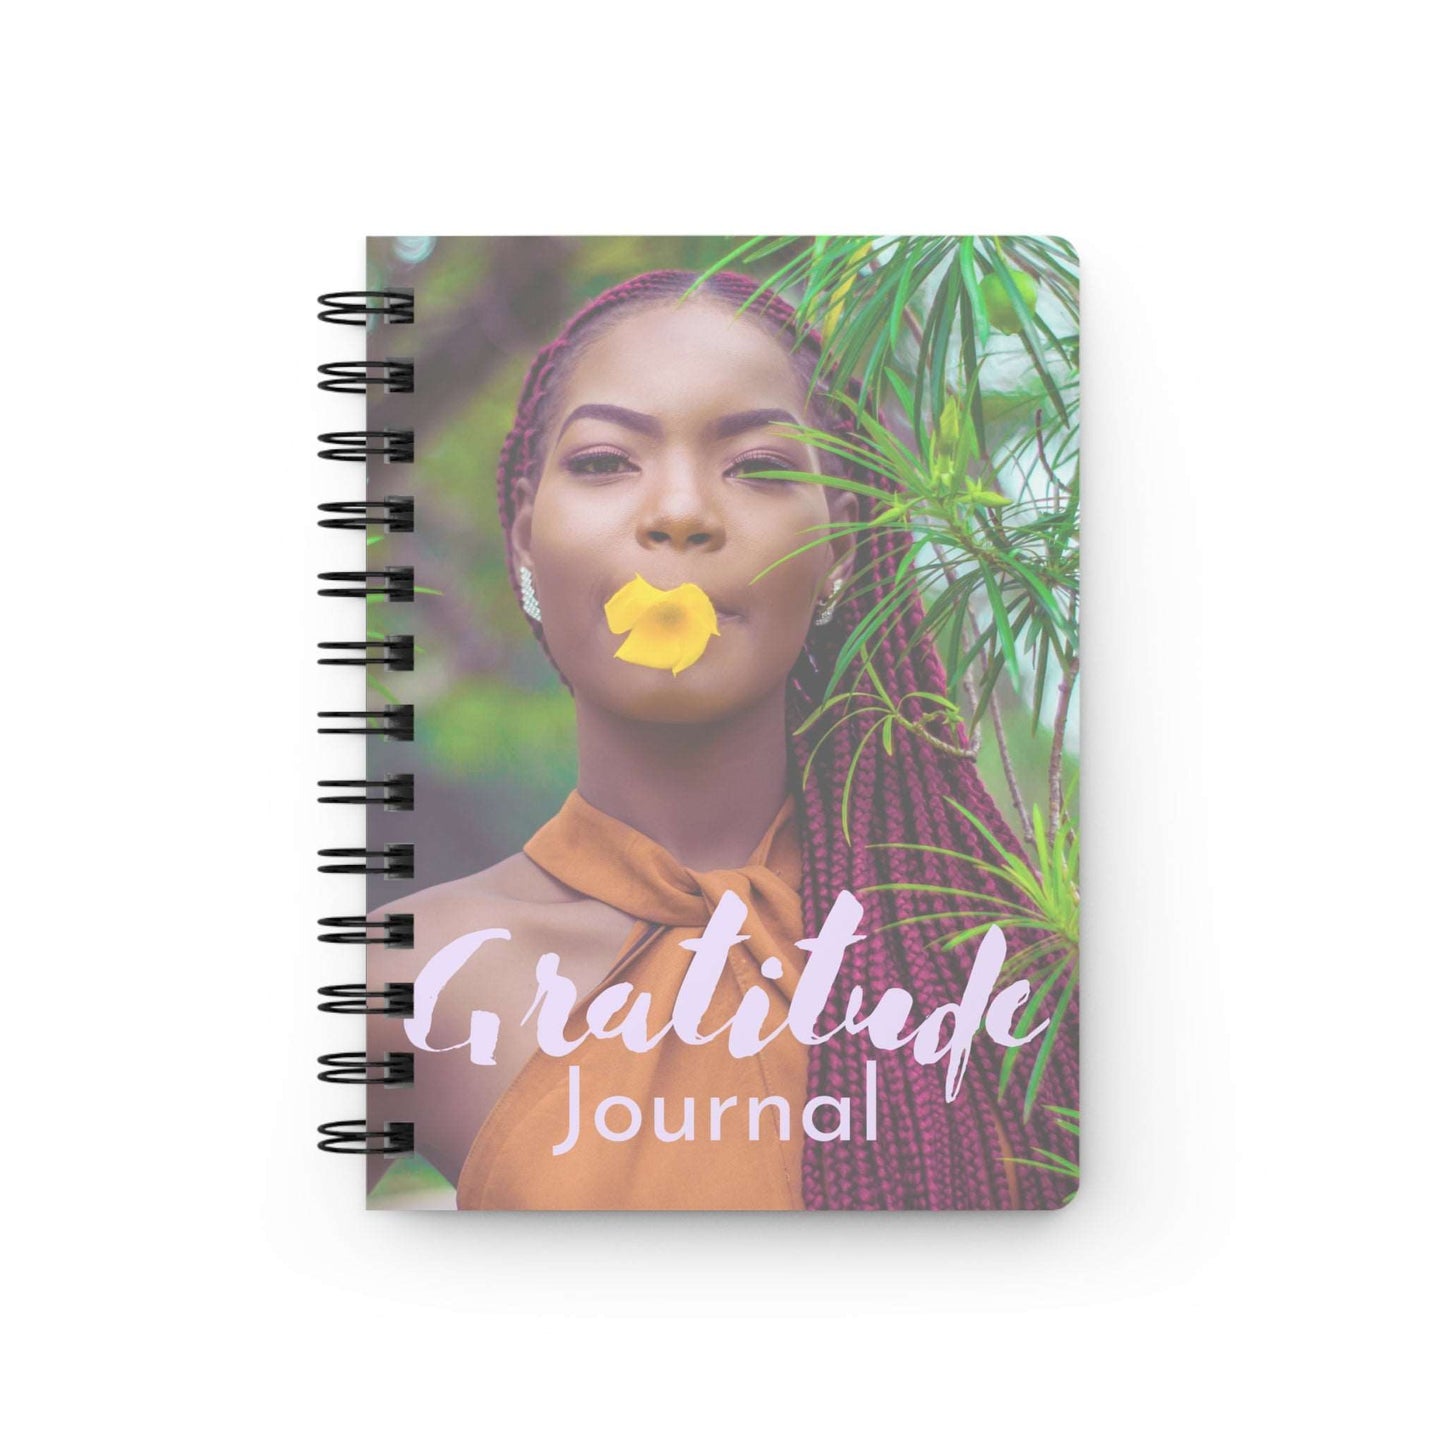 A spiral notebook with the words "Gratitude Journal : A Journal For Women" on it.